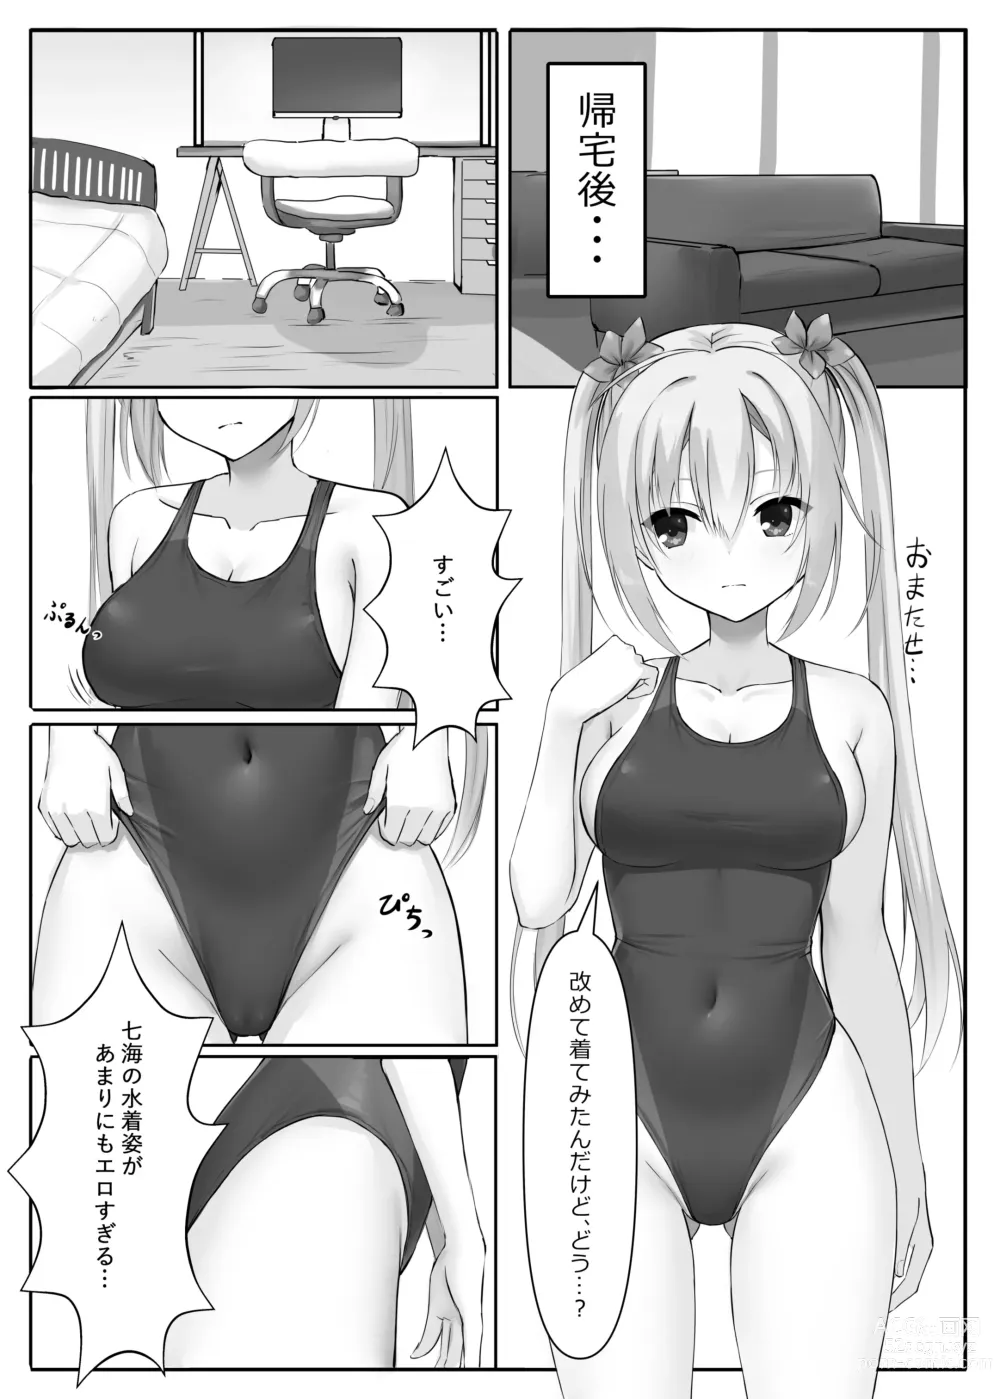 Page 7 of doujinshi Competition Swimsuit Nanami